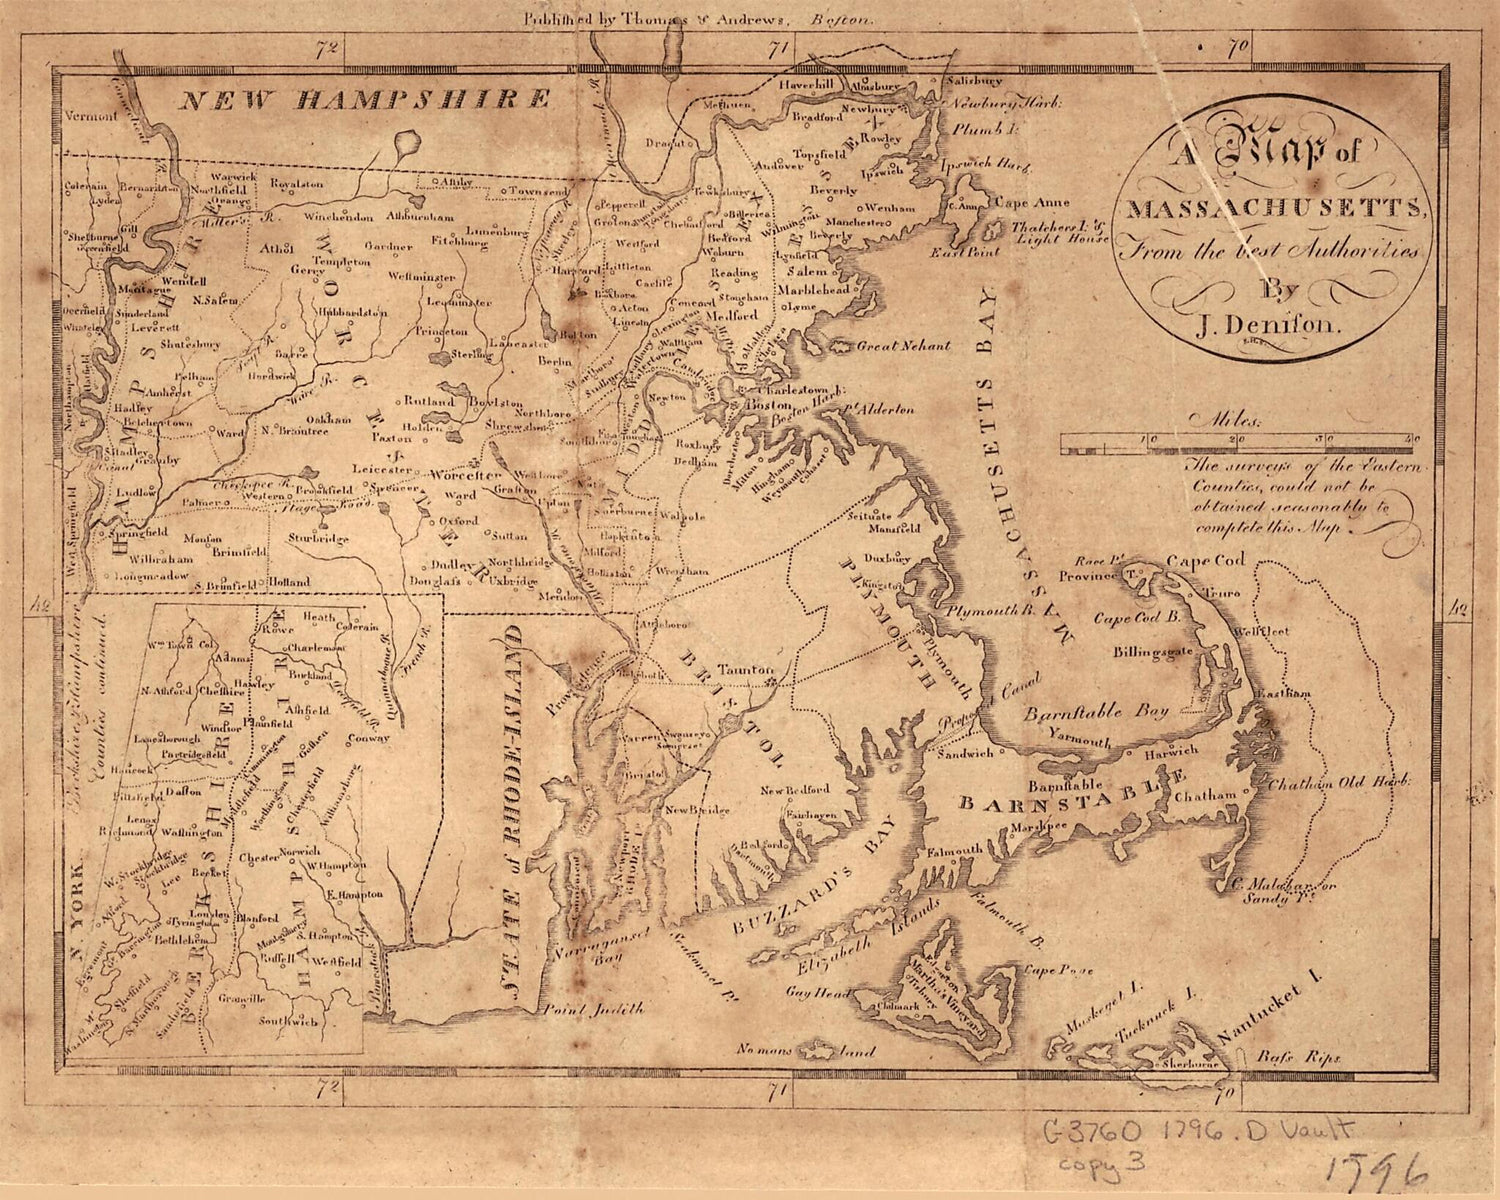 This old map of A Map of Massachusetts : from the Best Authorities from 1796 was created by J. Denison, Samuel Hill, Jedidiah Morse in 1796